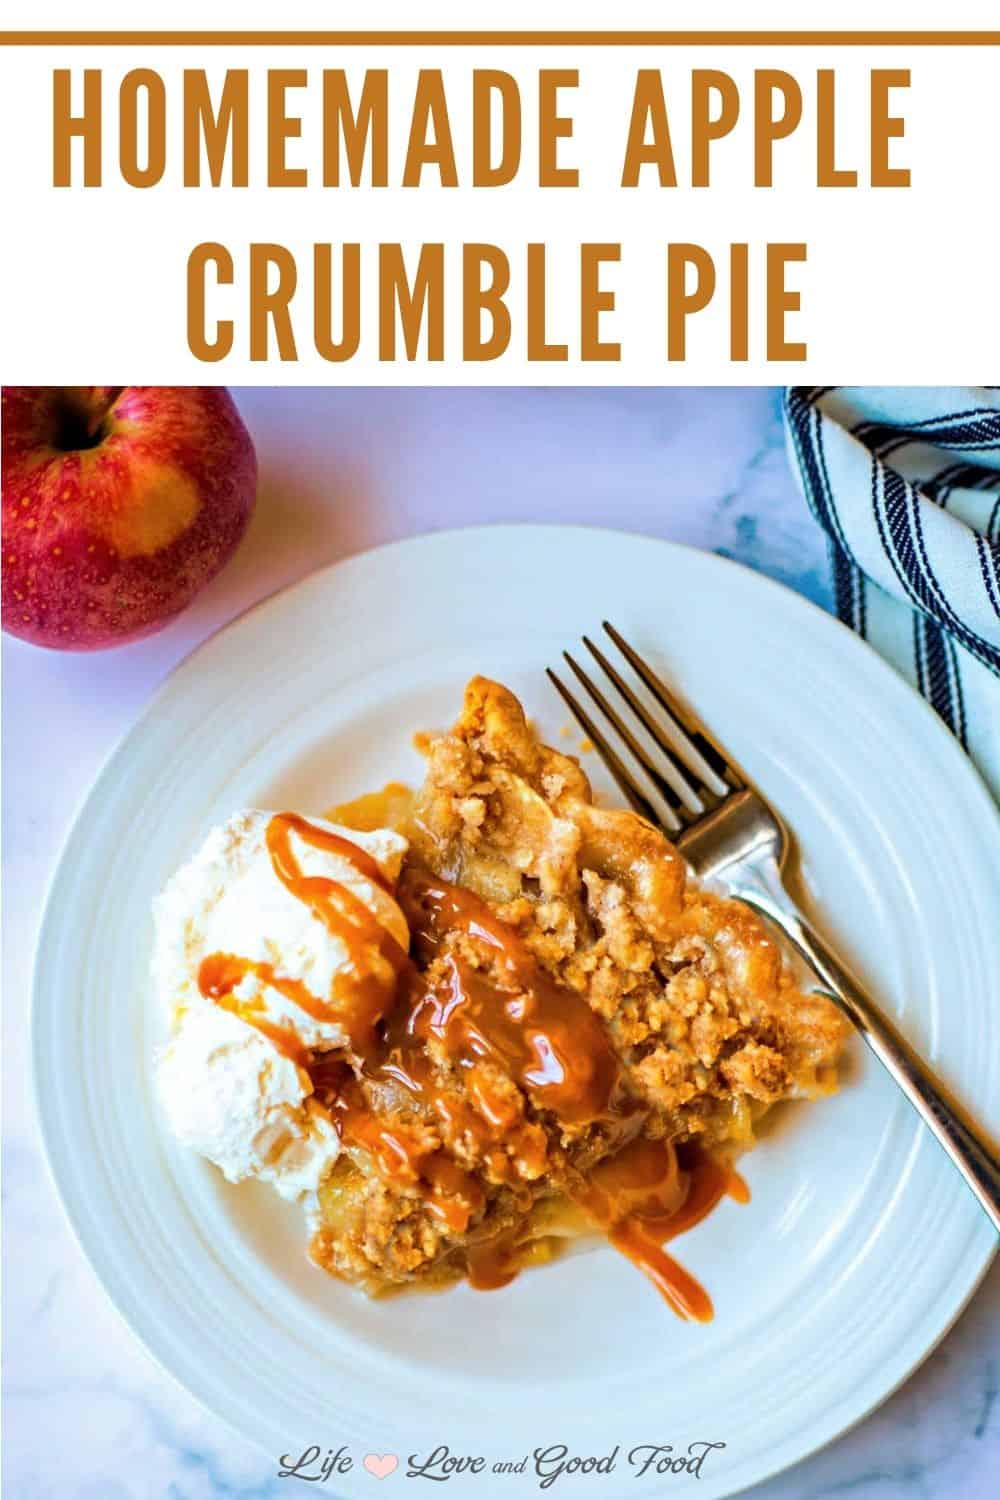 Apple Crumble Pie Recipe - Life, Love, and Good Food